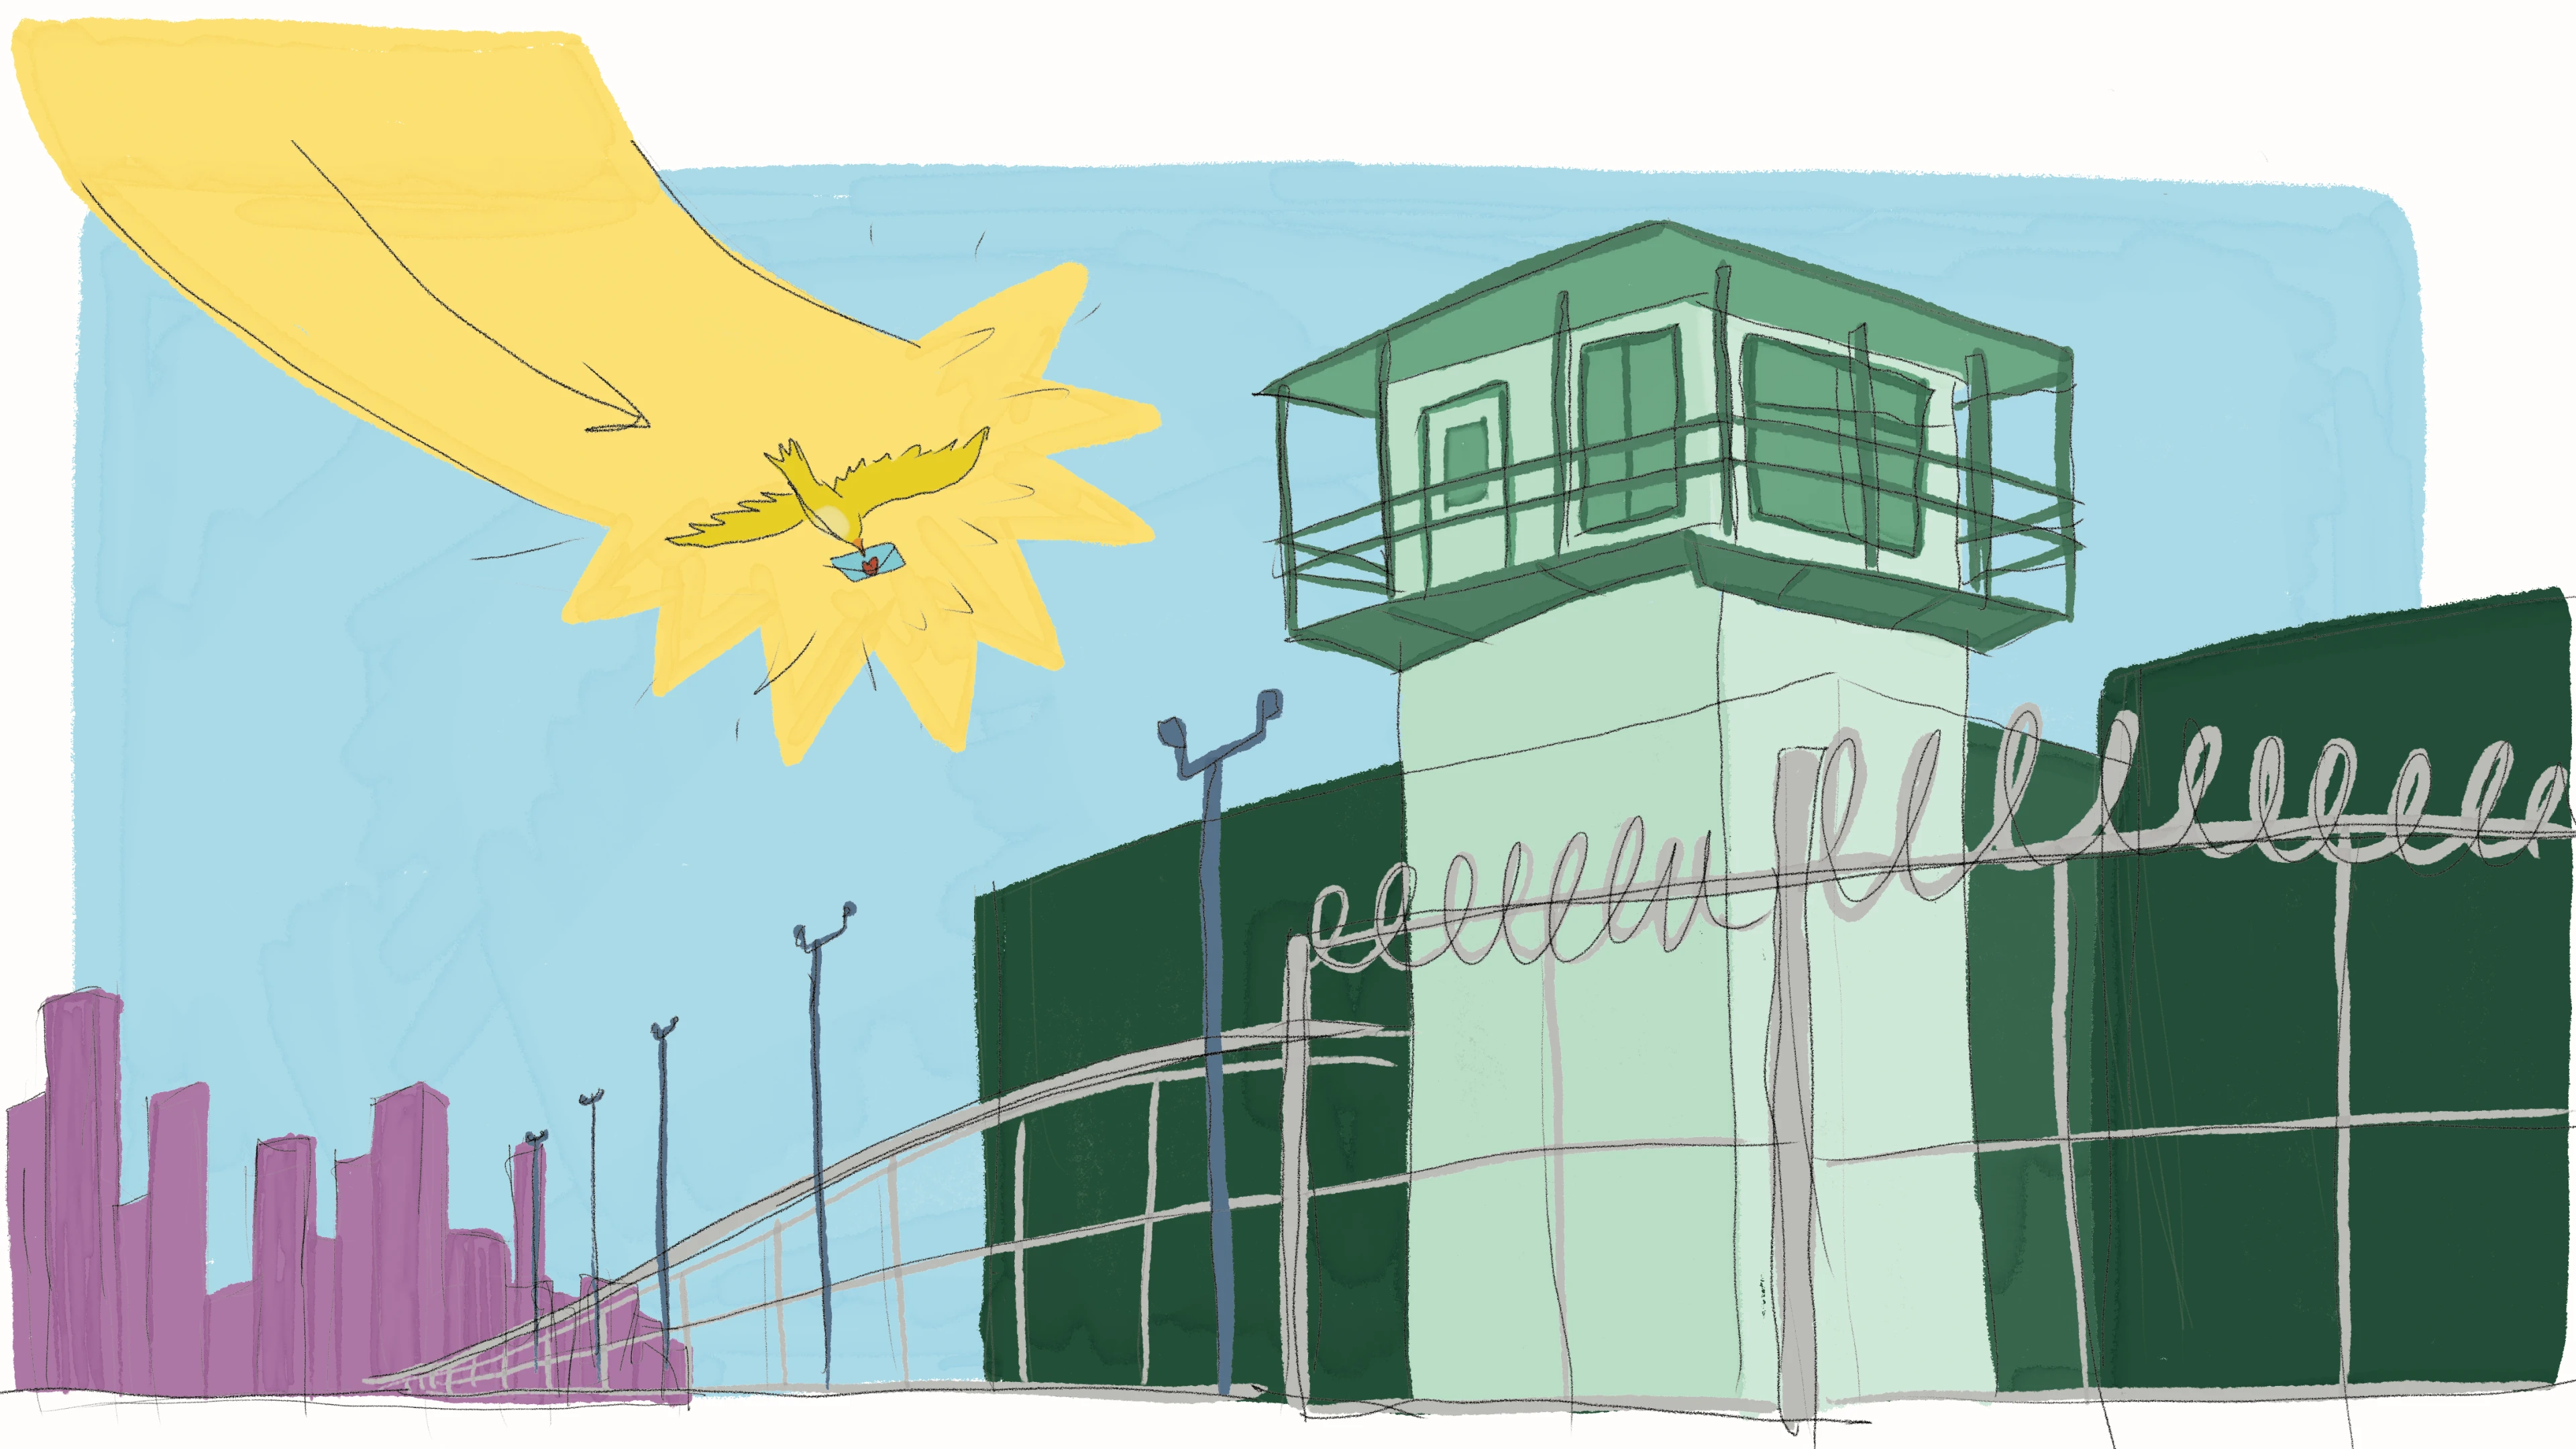 Colorful hand-drawn-style illustration of a prison. A bird is delivering a letter over the prison wall.